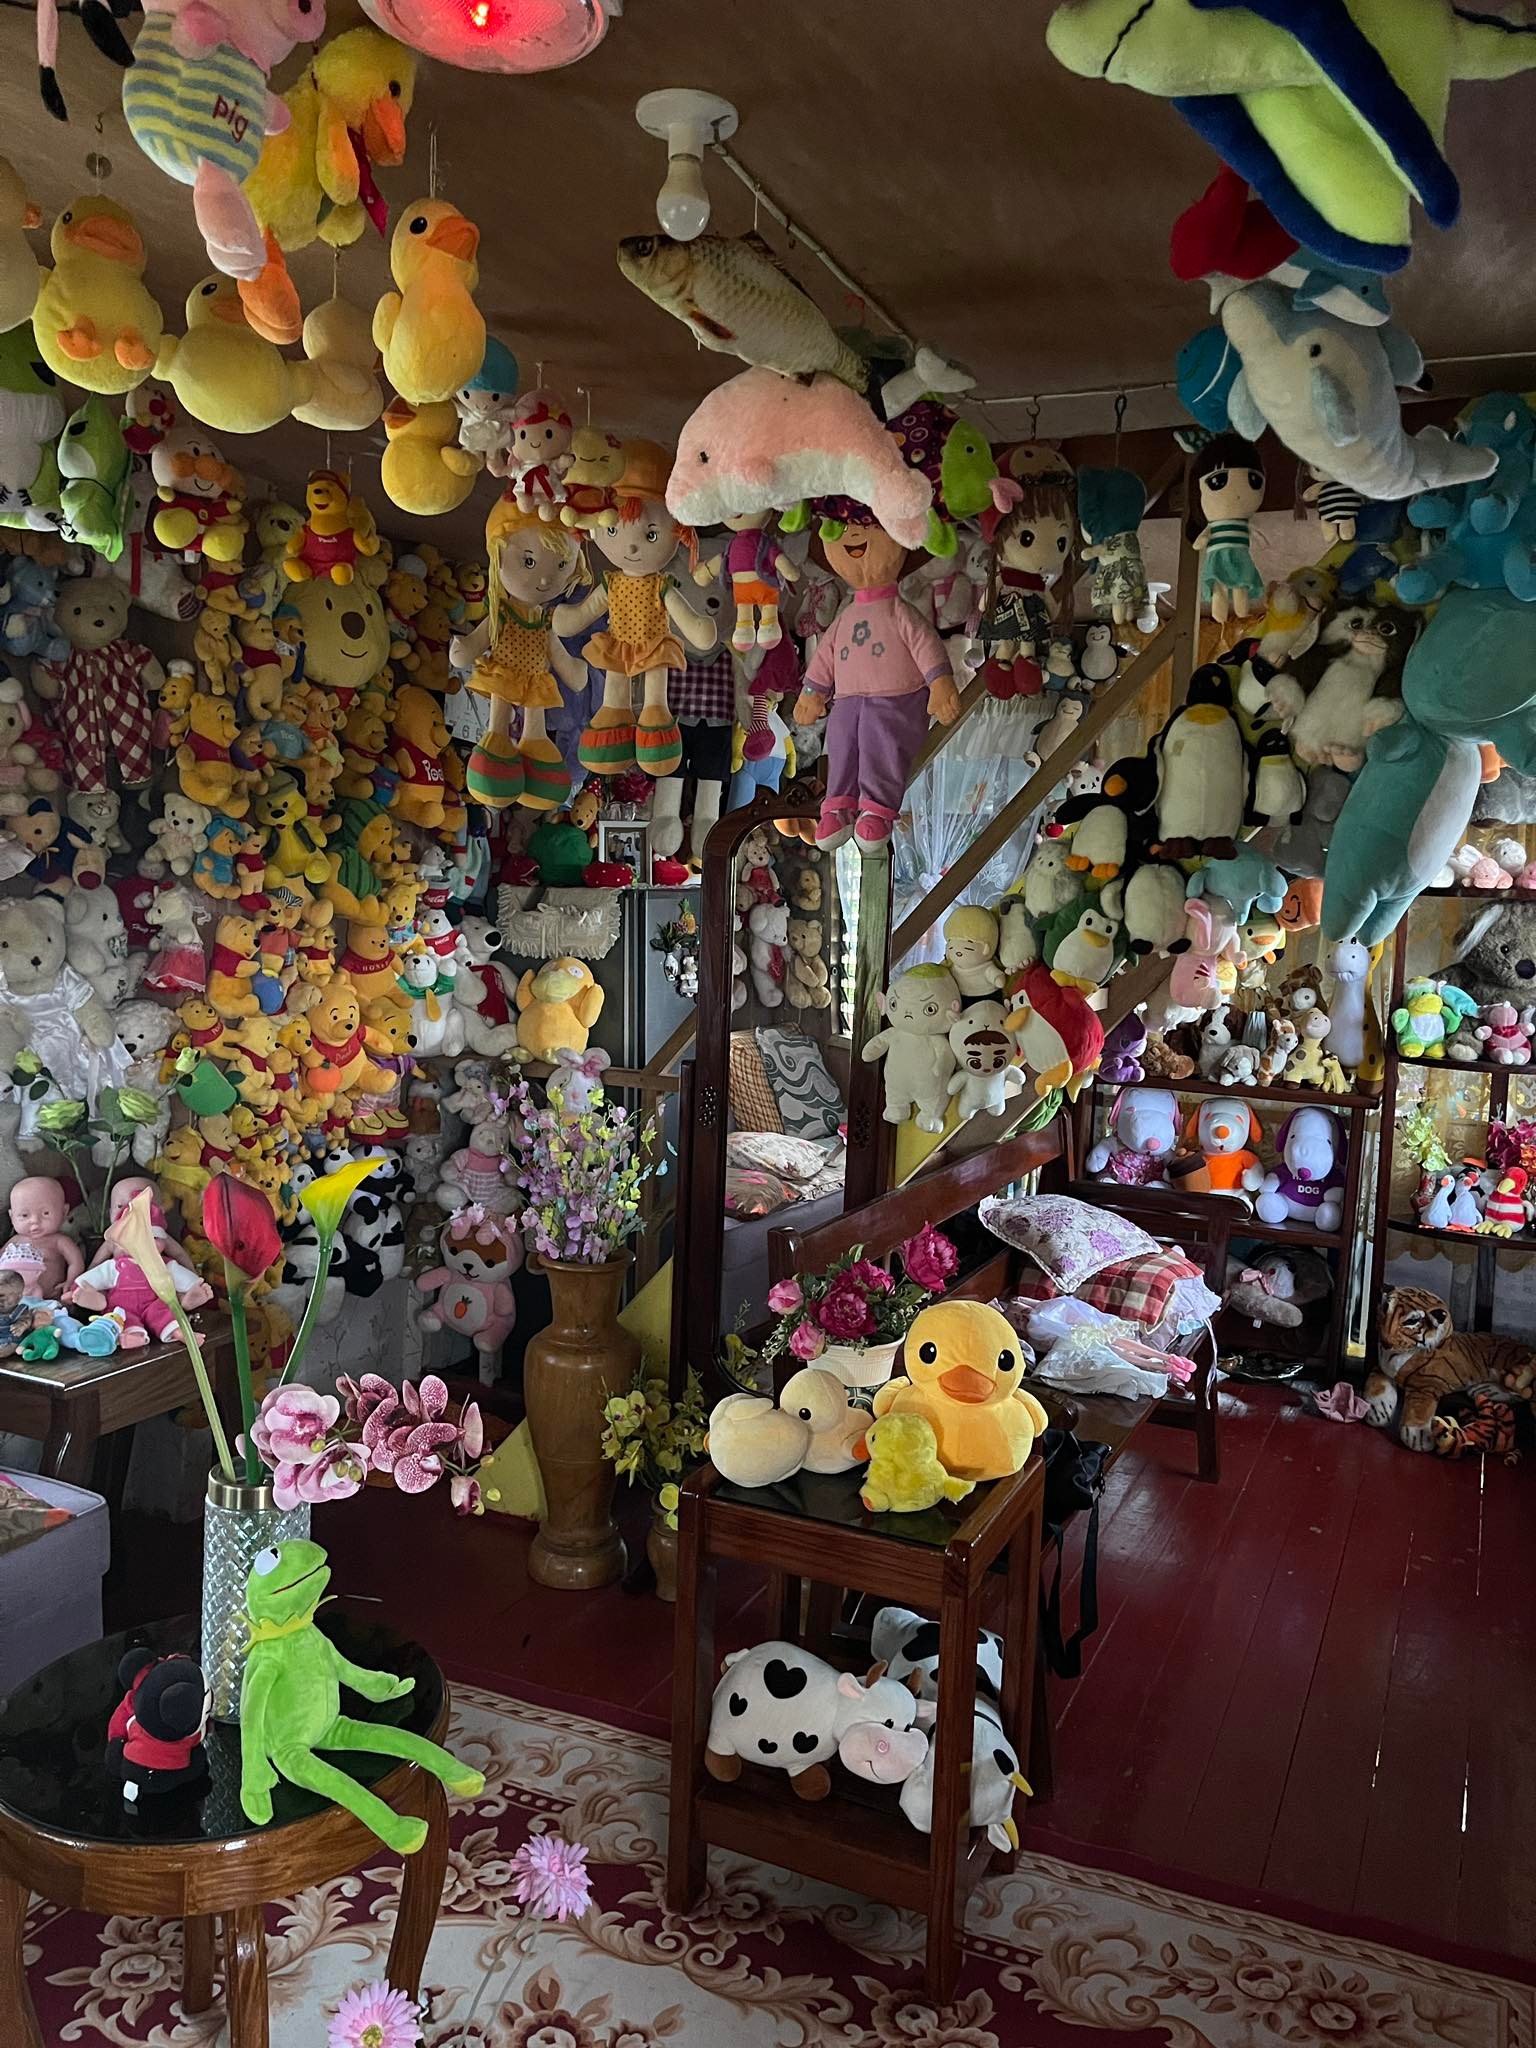 <b class="font-bara"><i class="bi bi-geo-fill h4"></i> GRACE'S TOYS HOUSE</b> <br/>Are you into stuff toys and dolls? Then this is the perfect place for you! Grace's Toys House have more than 1000 stuff toys and dolls collected and displayed around the house. Surely adults and kids will enjoy here.